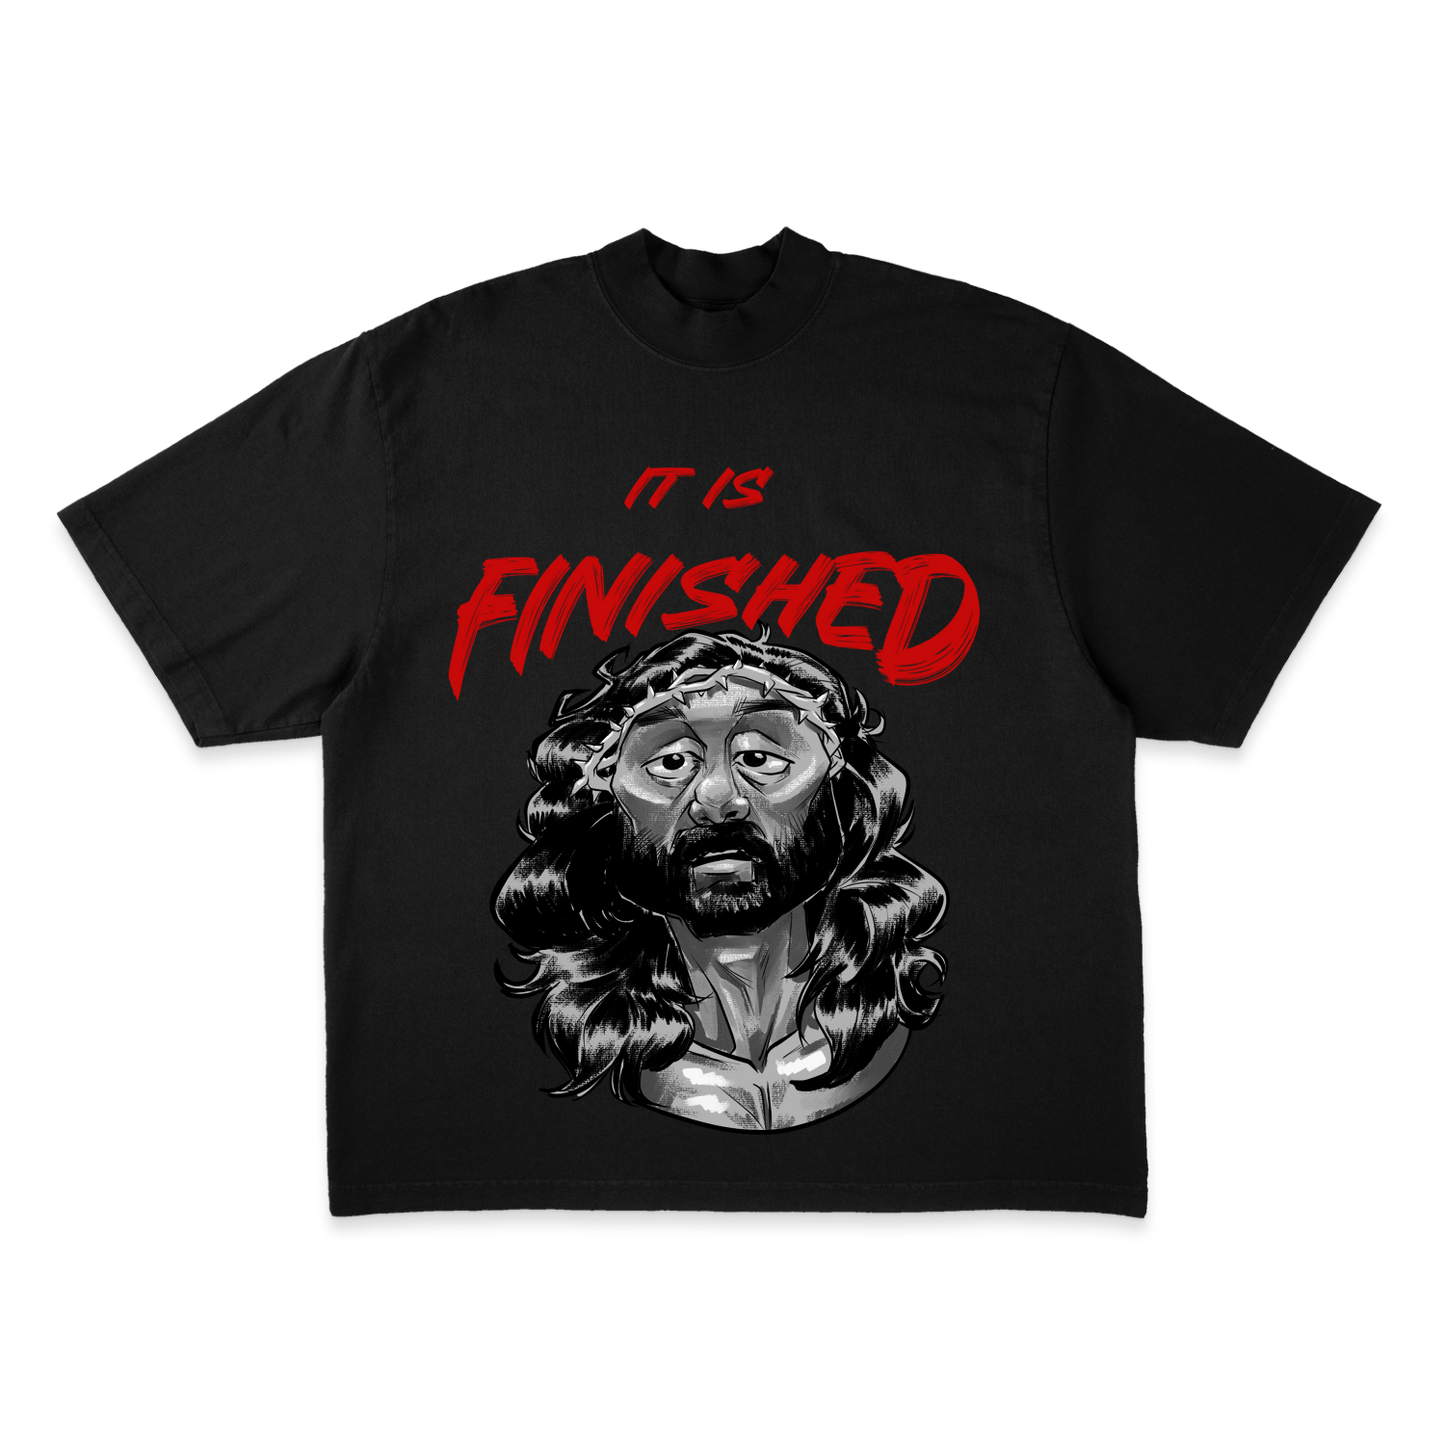 EBNZR "It Is Finished" Tee